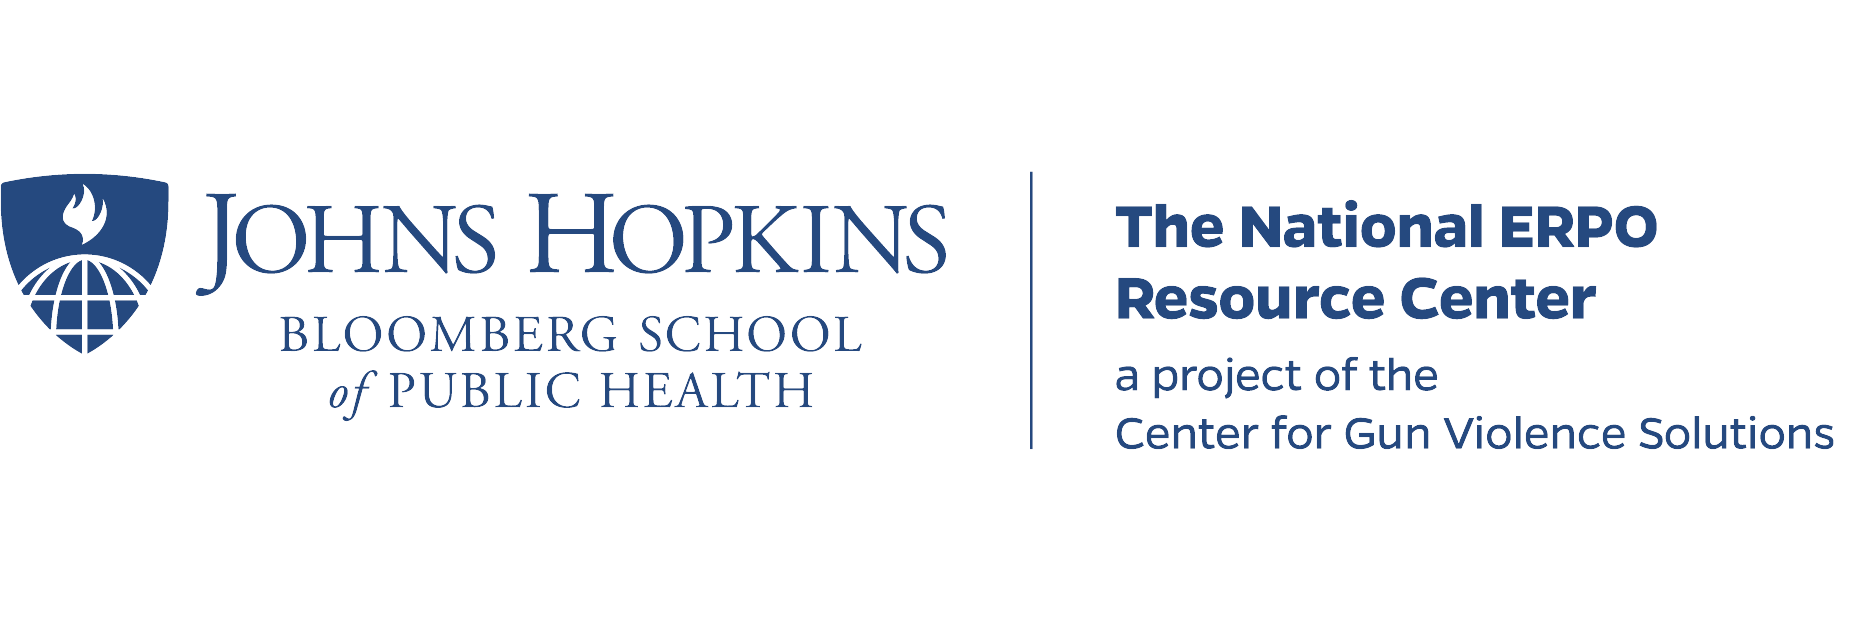 Johns Hopkins Bloomberg School of Public Health, The National ERPO Resource Center, a project of the Center for Gun Violence Solutions logo